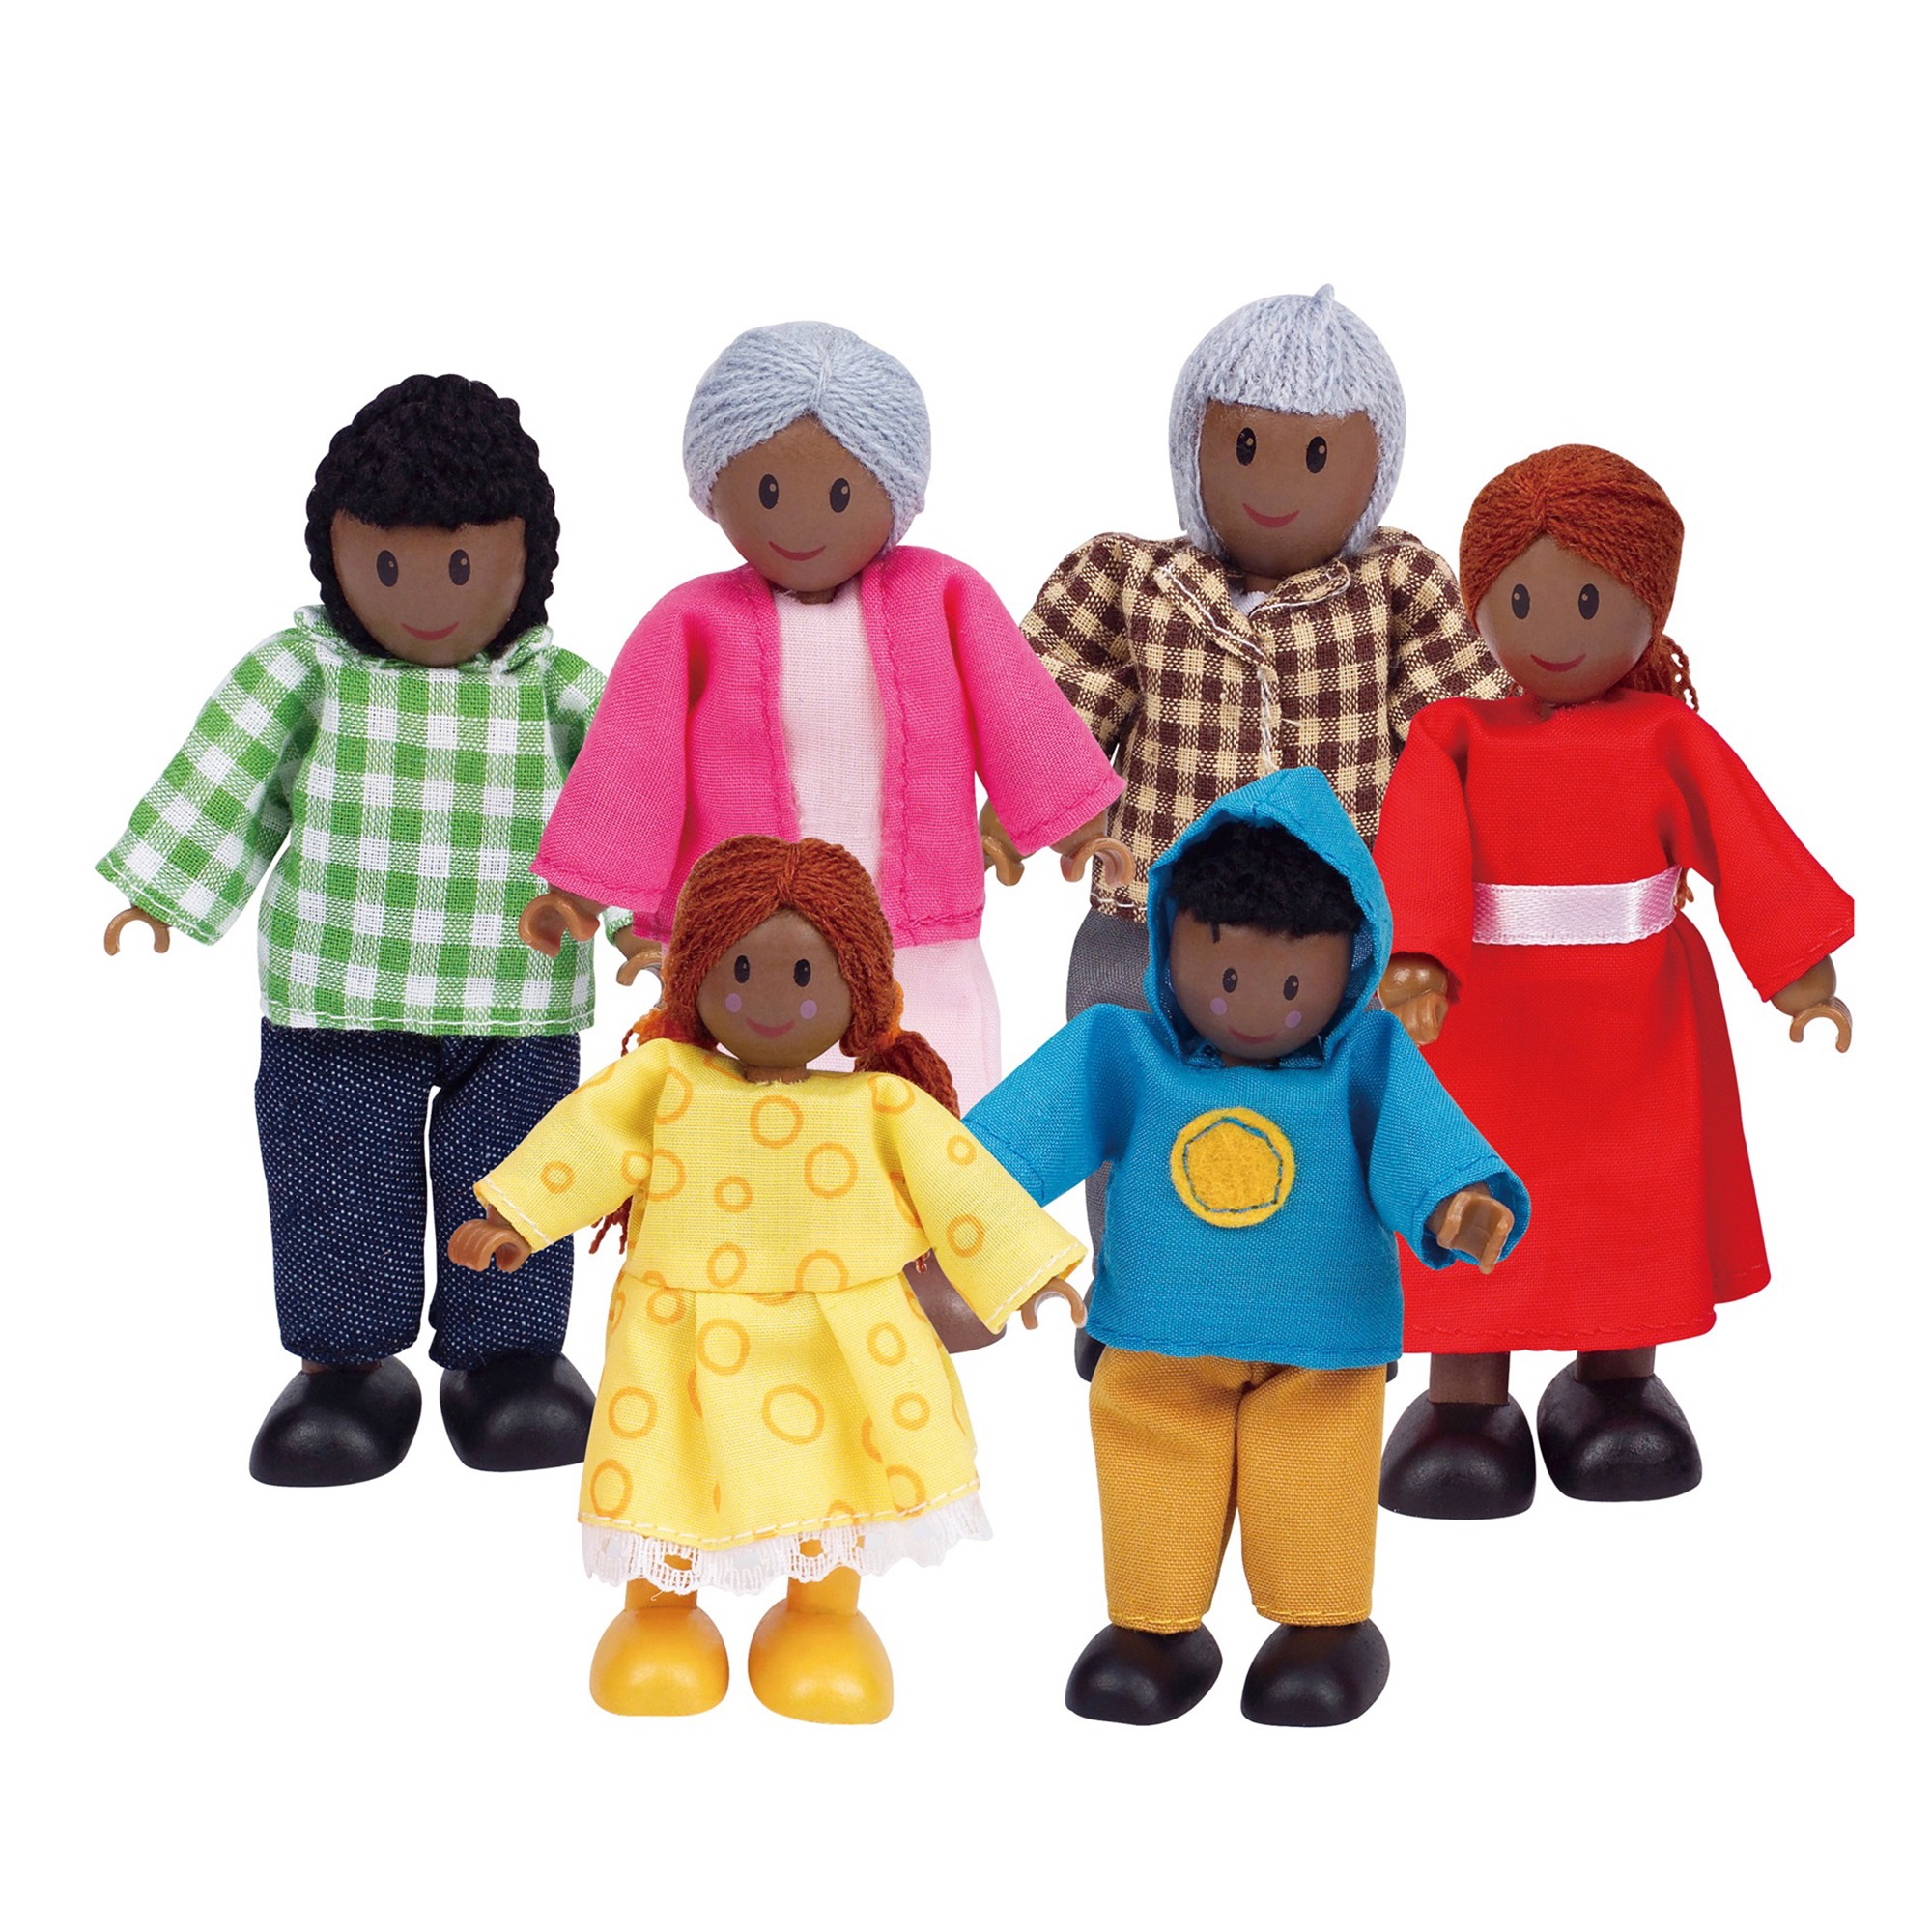 Hape African American Happy Family Dollhouse Set with 6 Dolls - image 1 of 5